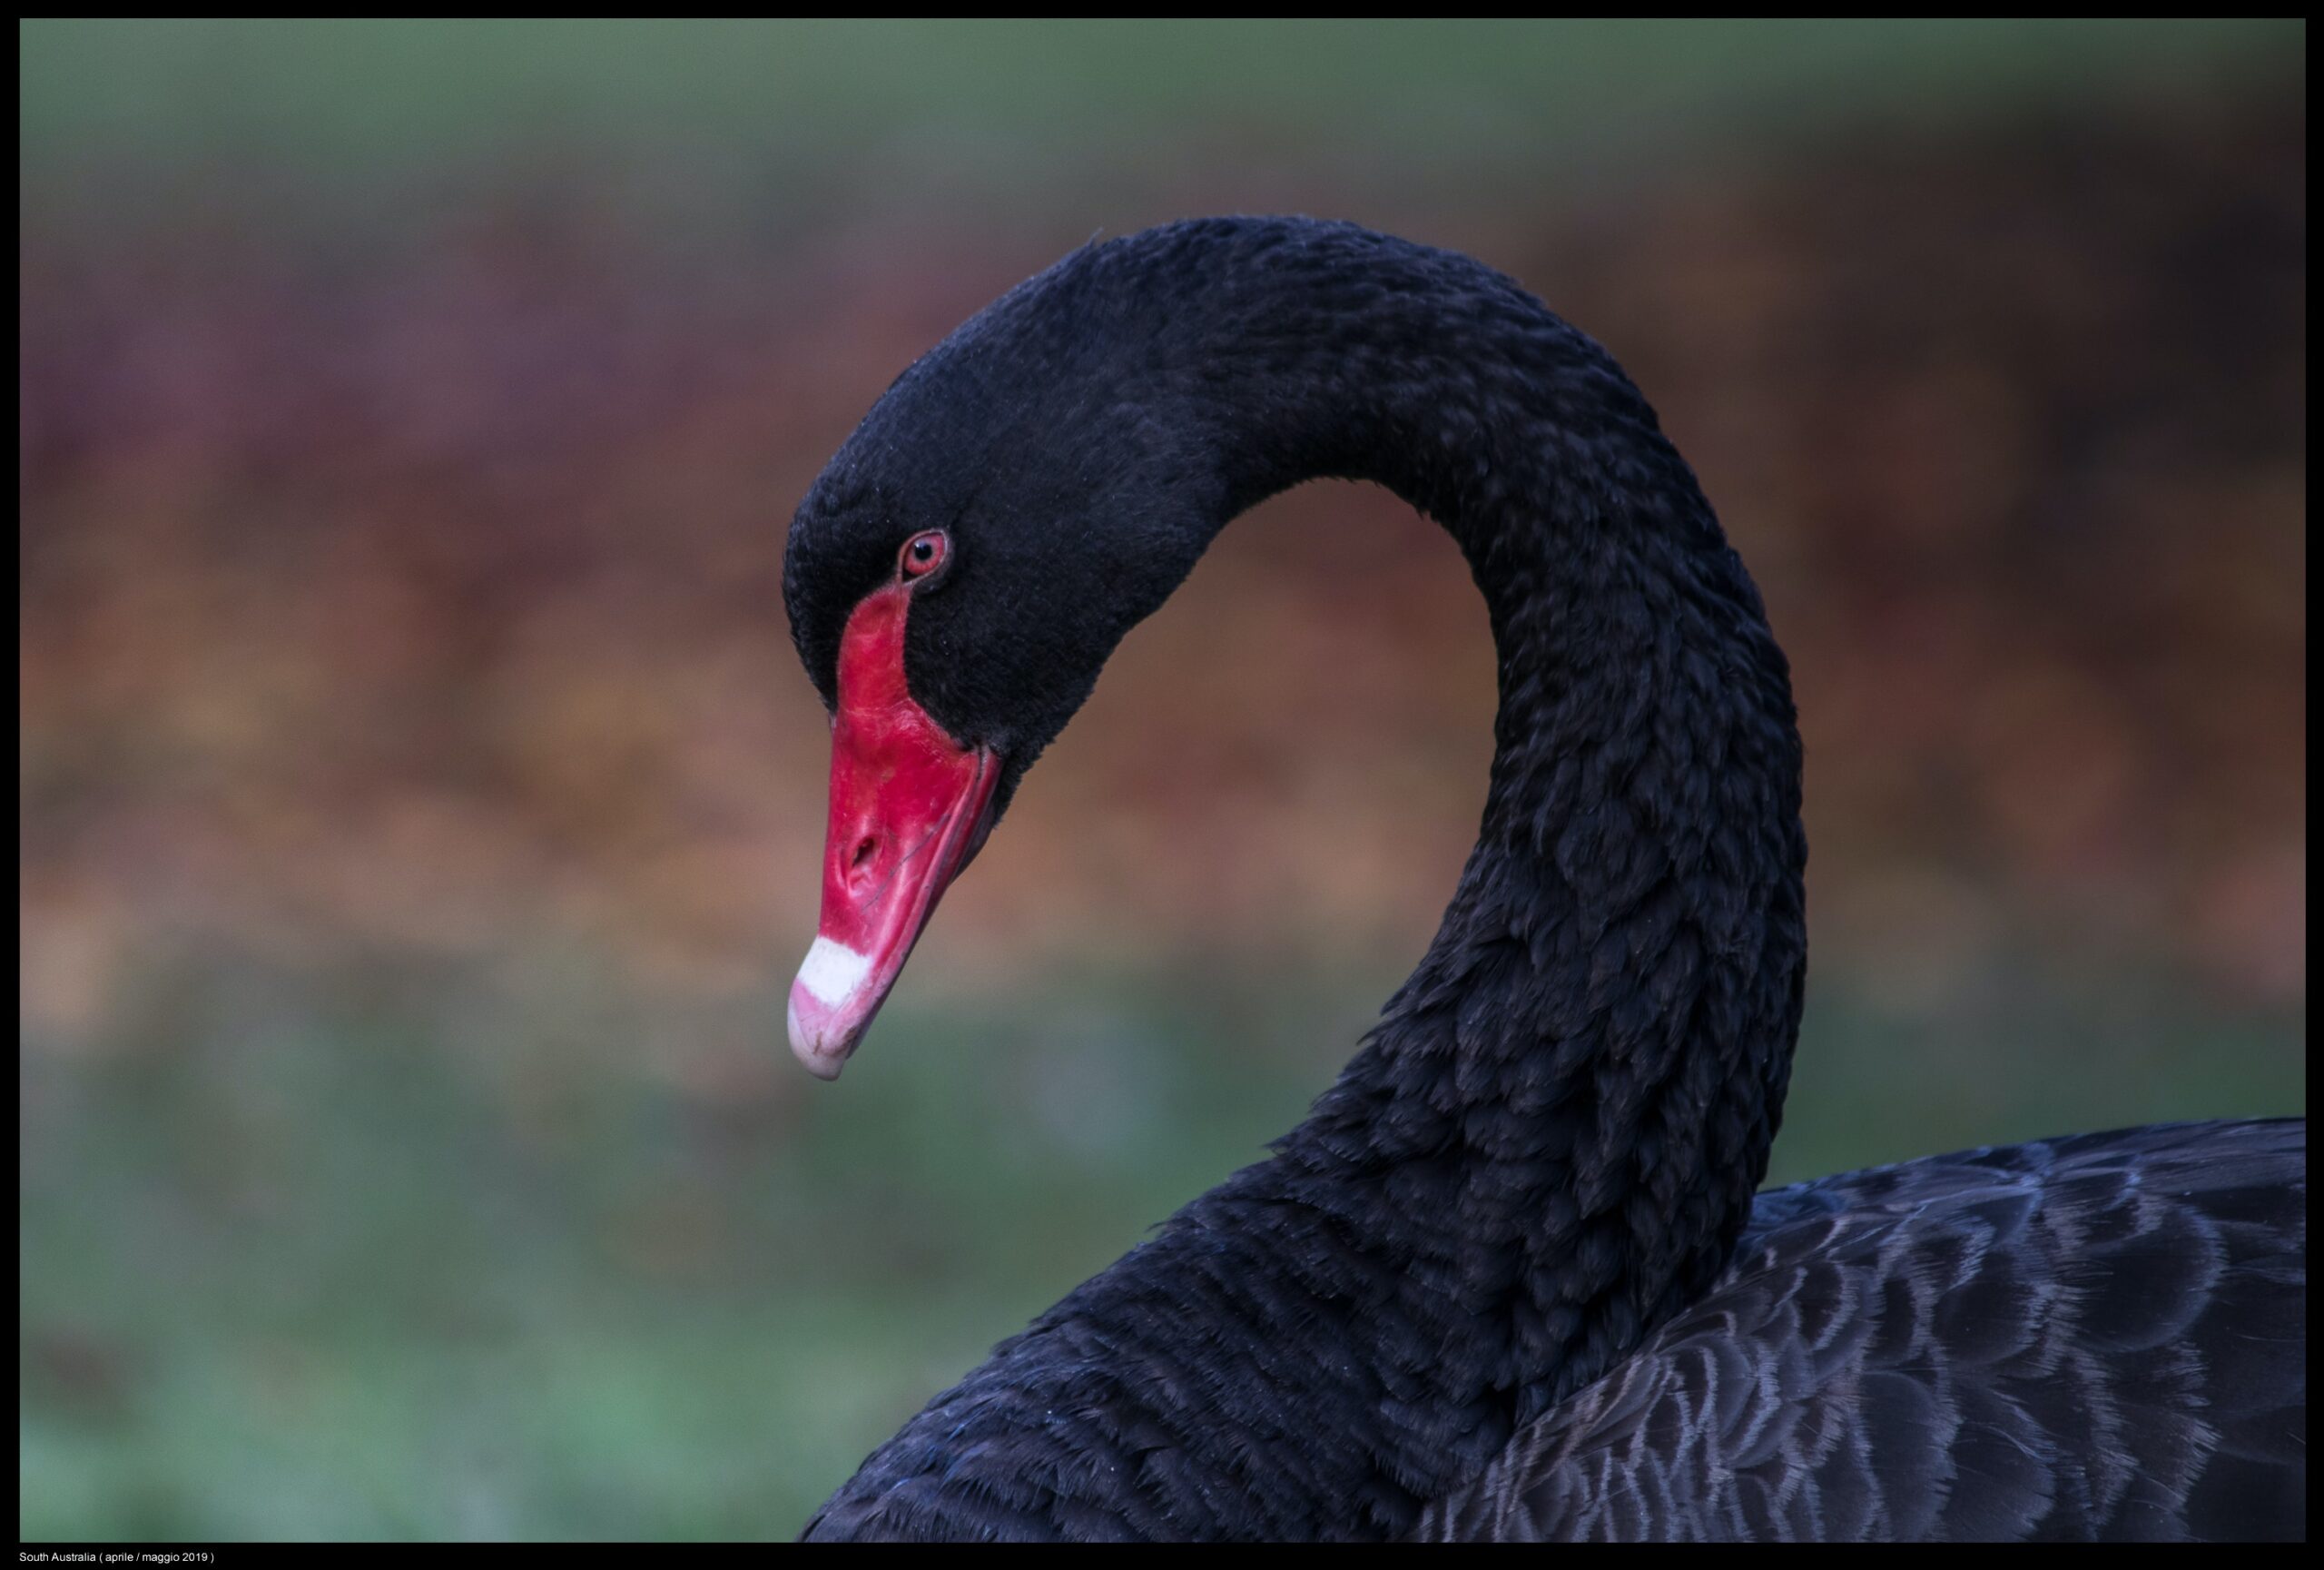 what-to-do-when-your-business-is-unprepared-for-a-black-swan-event-like-the-coronavirus